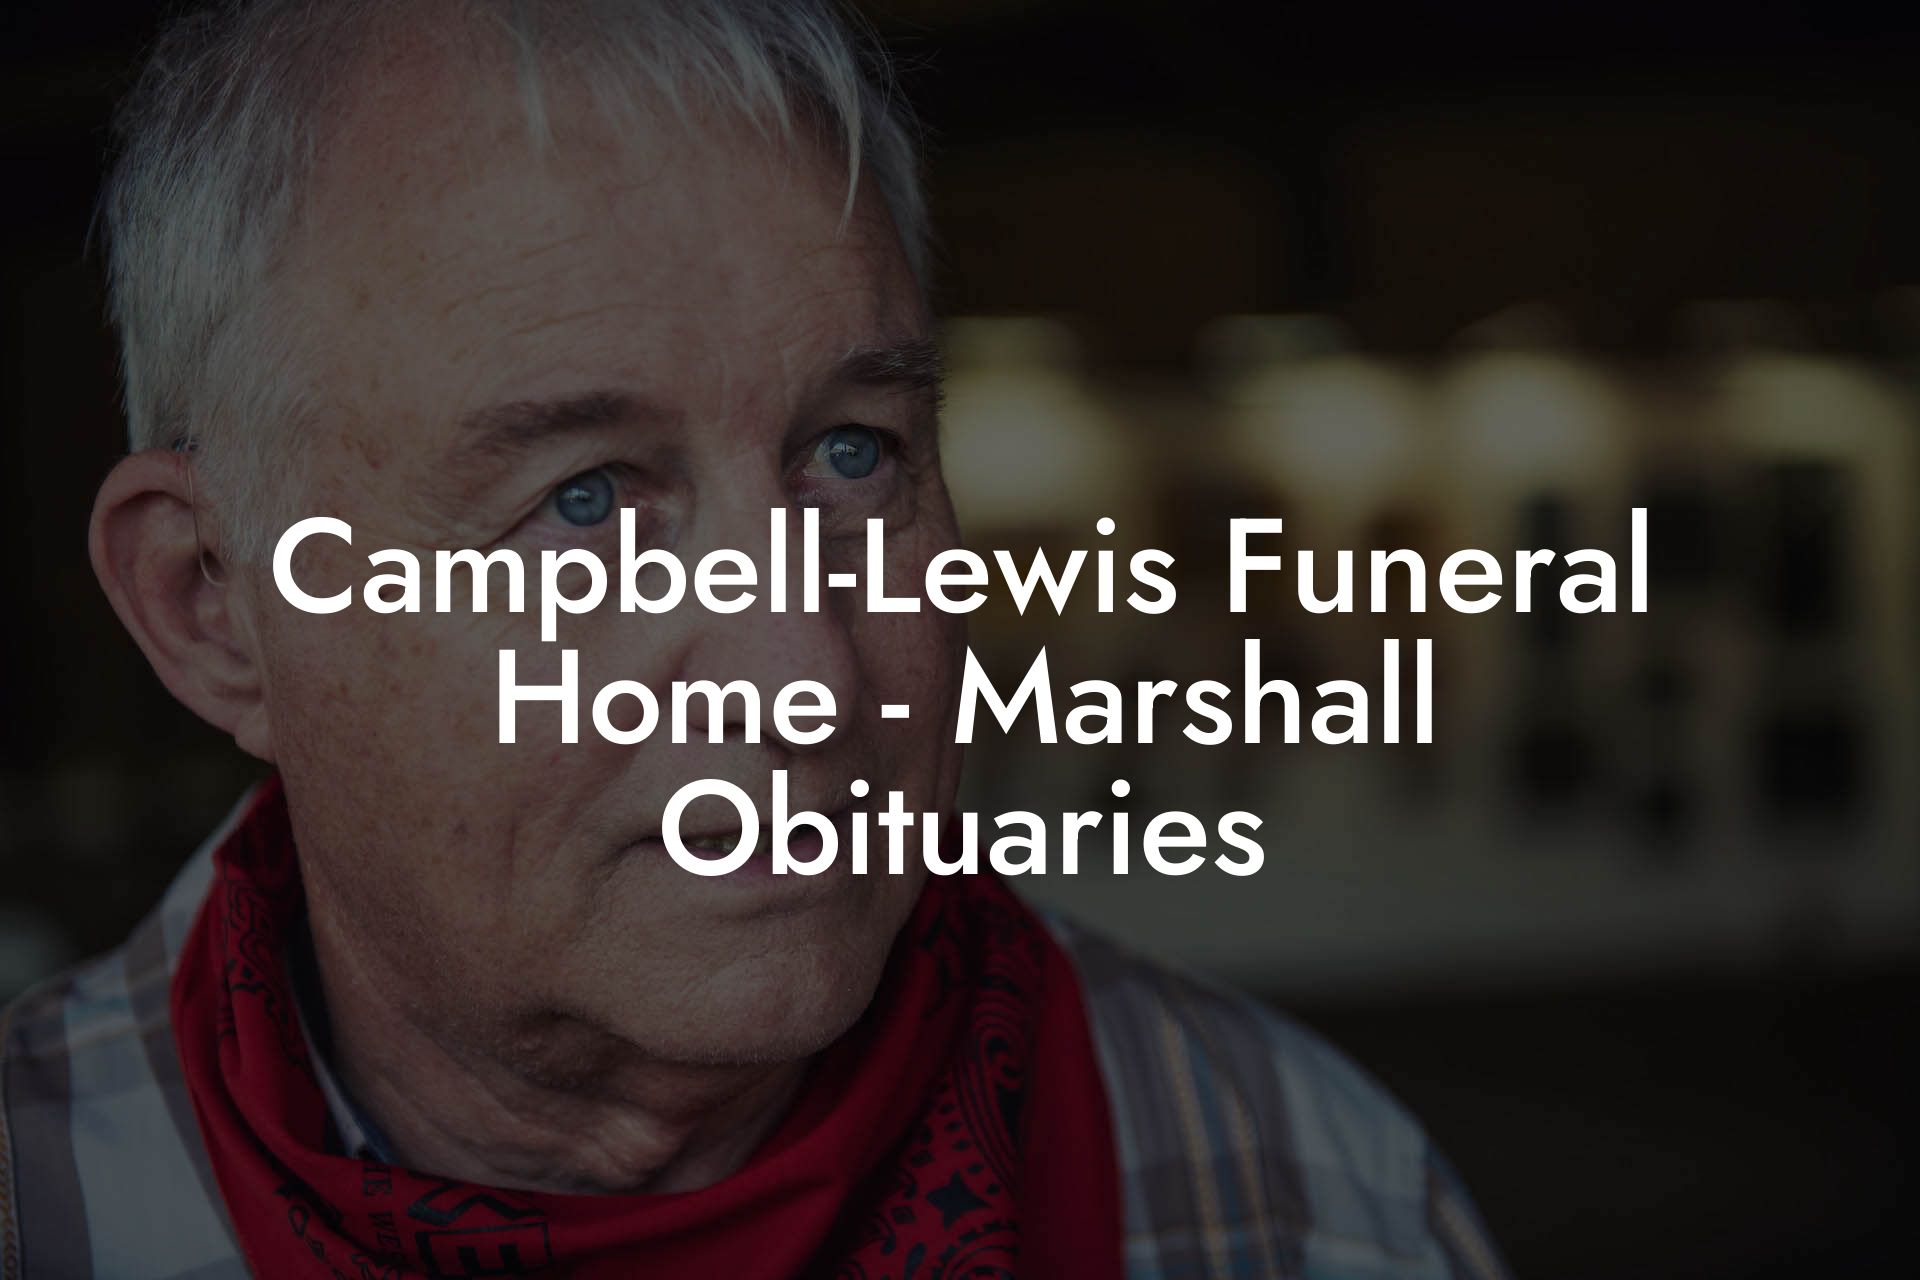 Campbell-Lewis Funeral Home - Marshall Obituaries